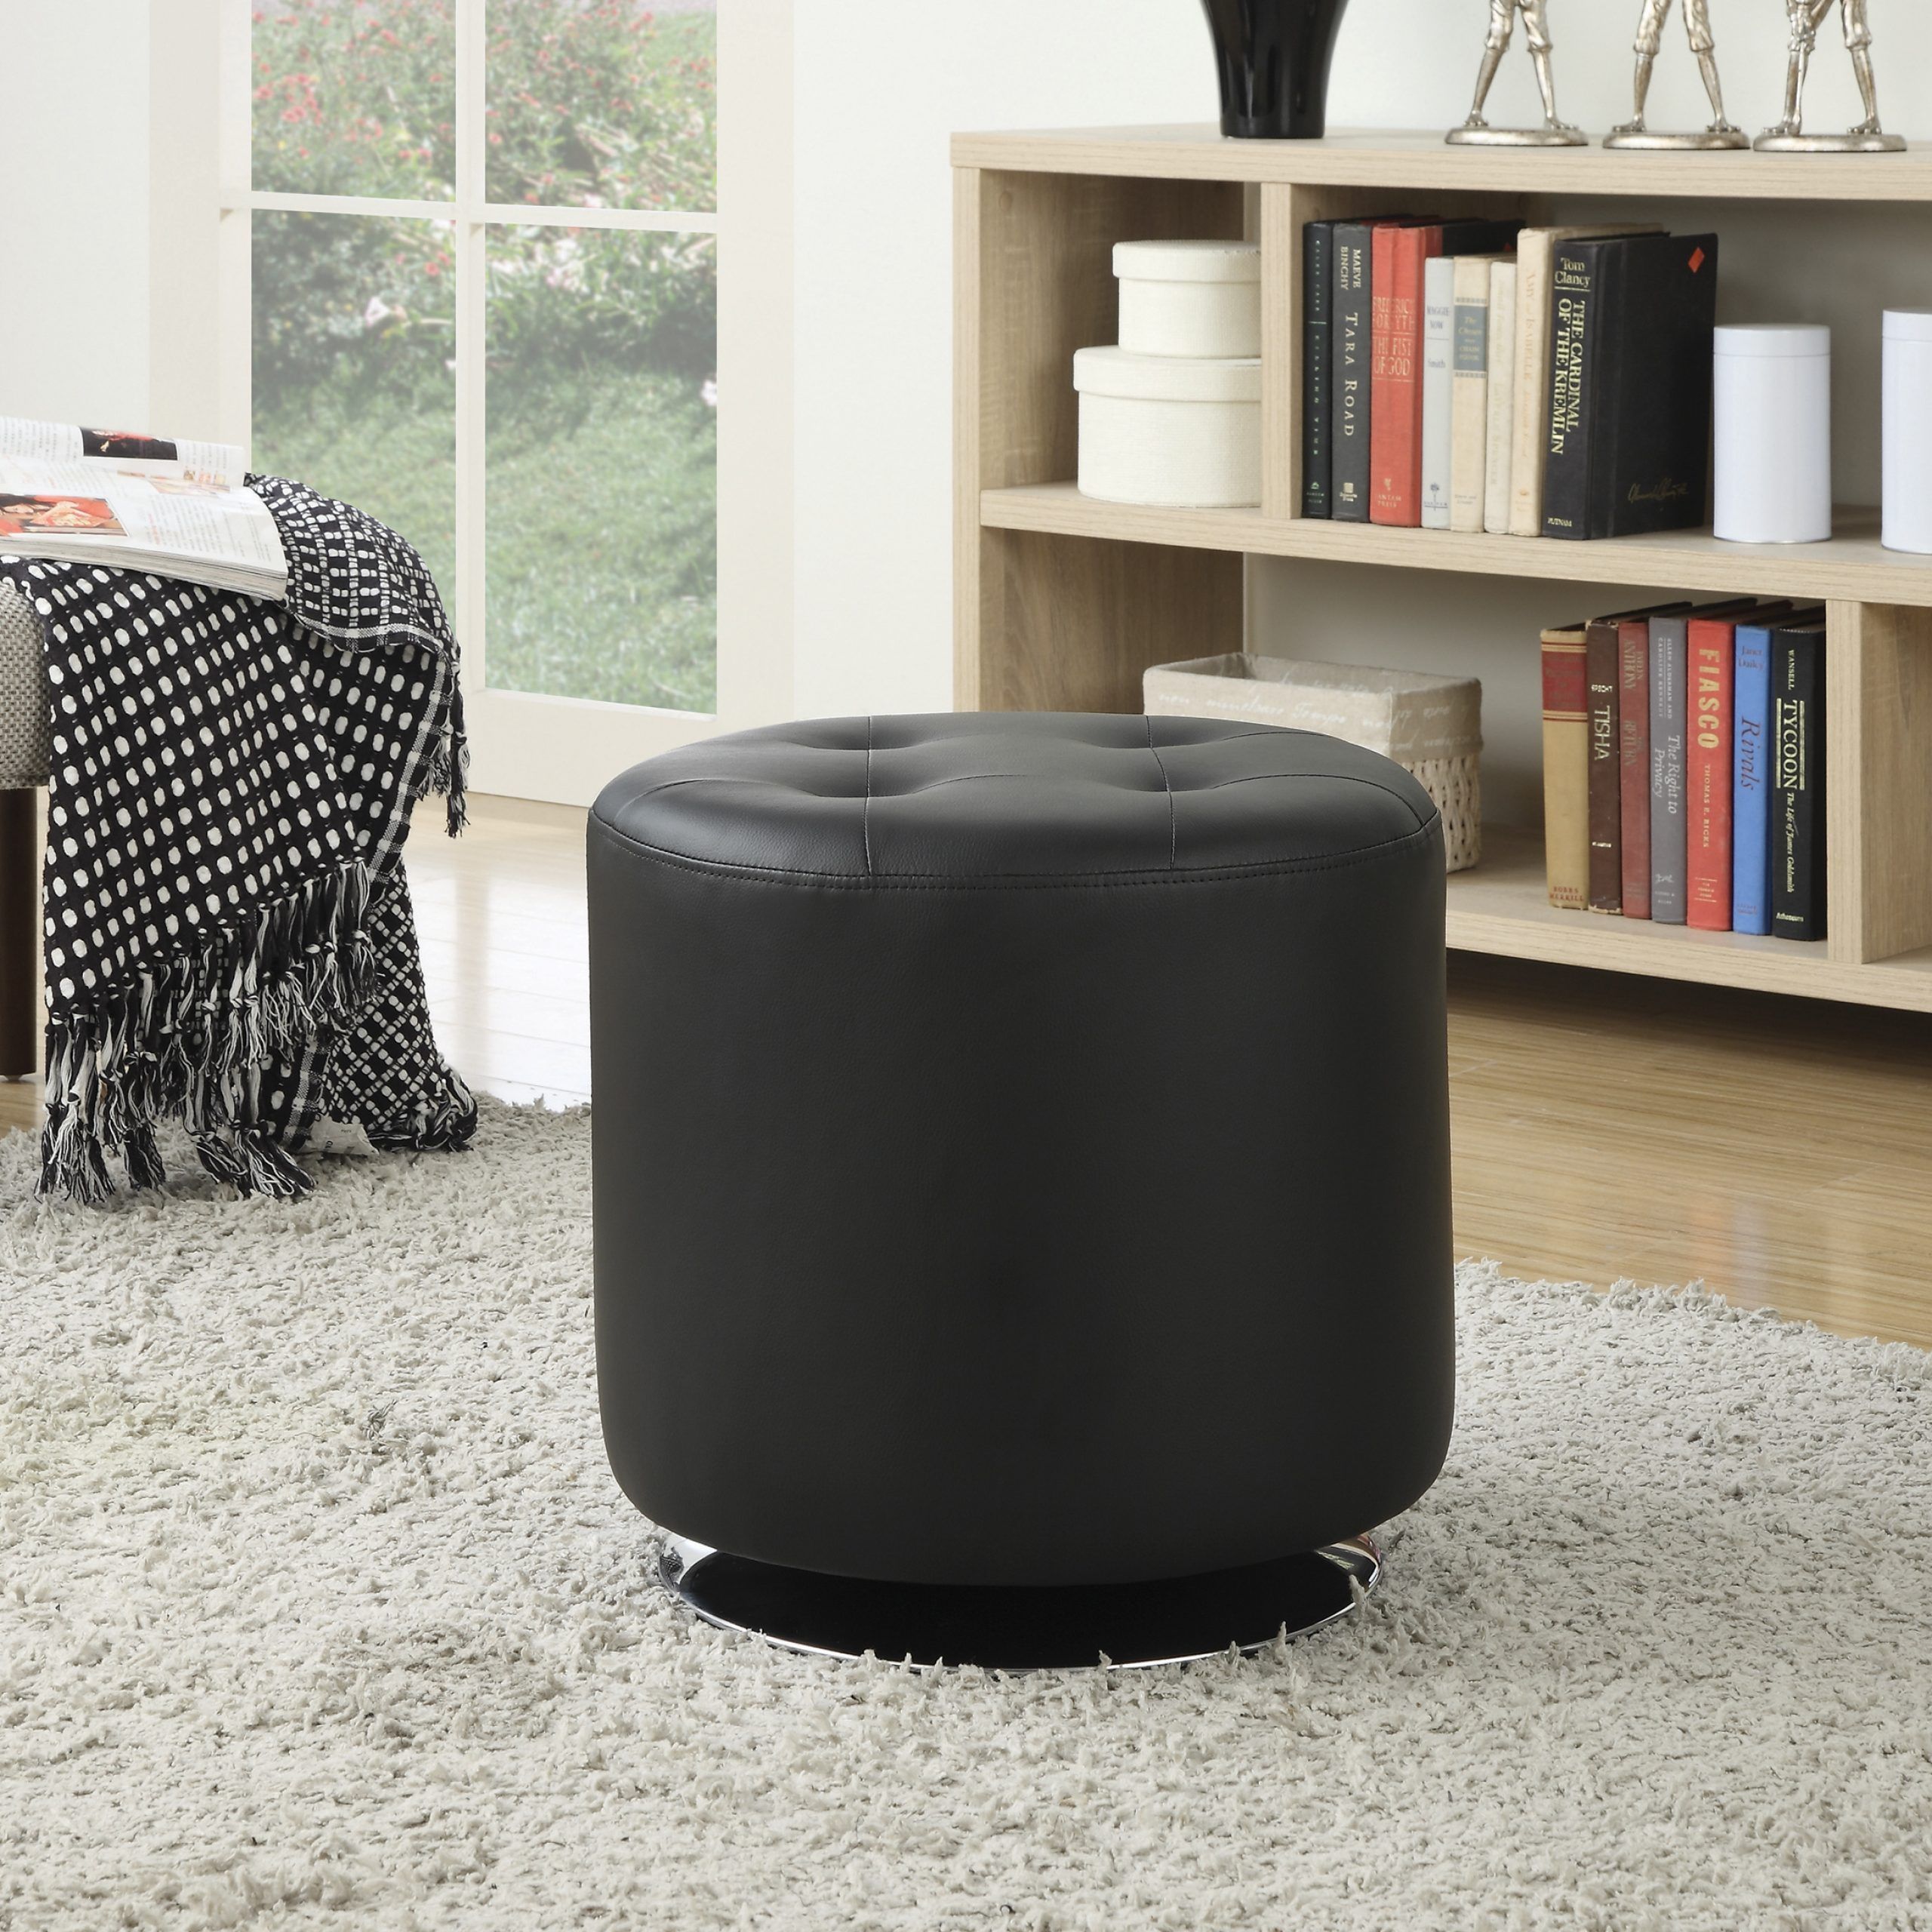 Round Upholstered Ottoman Black – Coaster Fine Furniture Within Round Black Tasseled Ottomans (View 1 of 20)